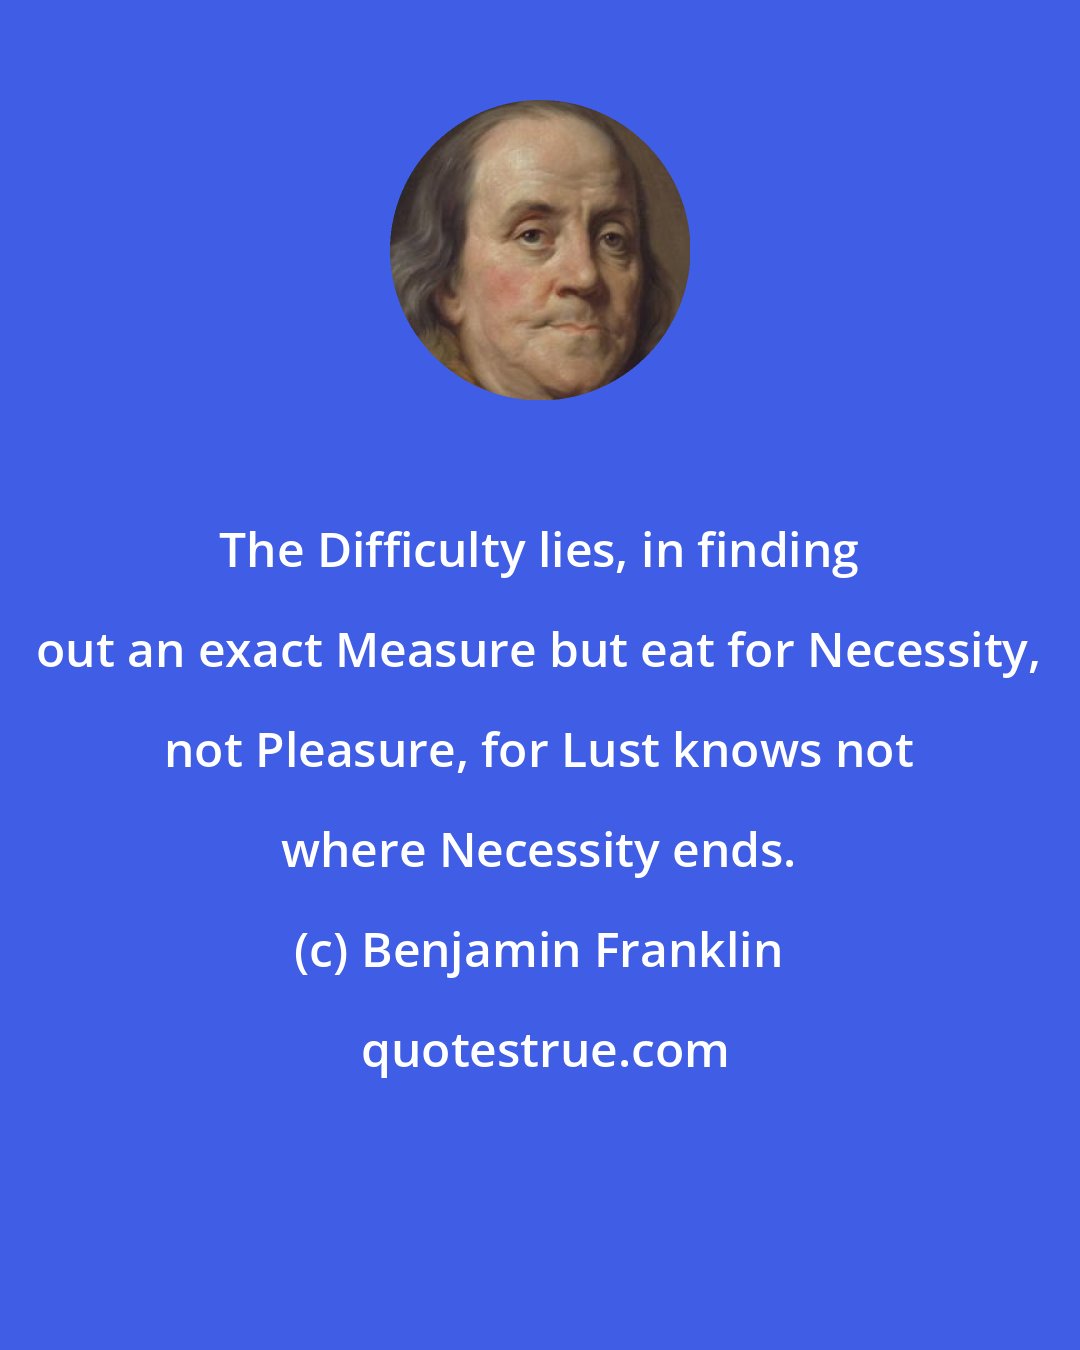 Benjamin Franklin: The Difficulty lies, in finding out an exact Measure but eat for Necessity, not Pleasure, for Lust knows not where Necessity ends.